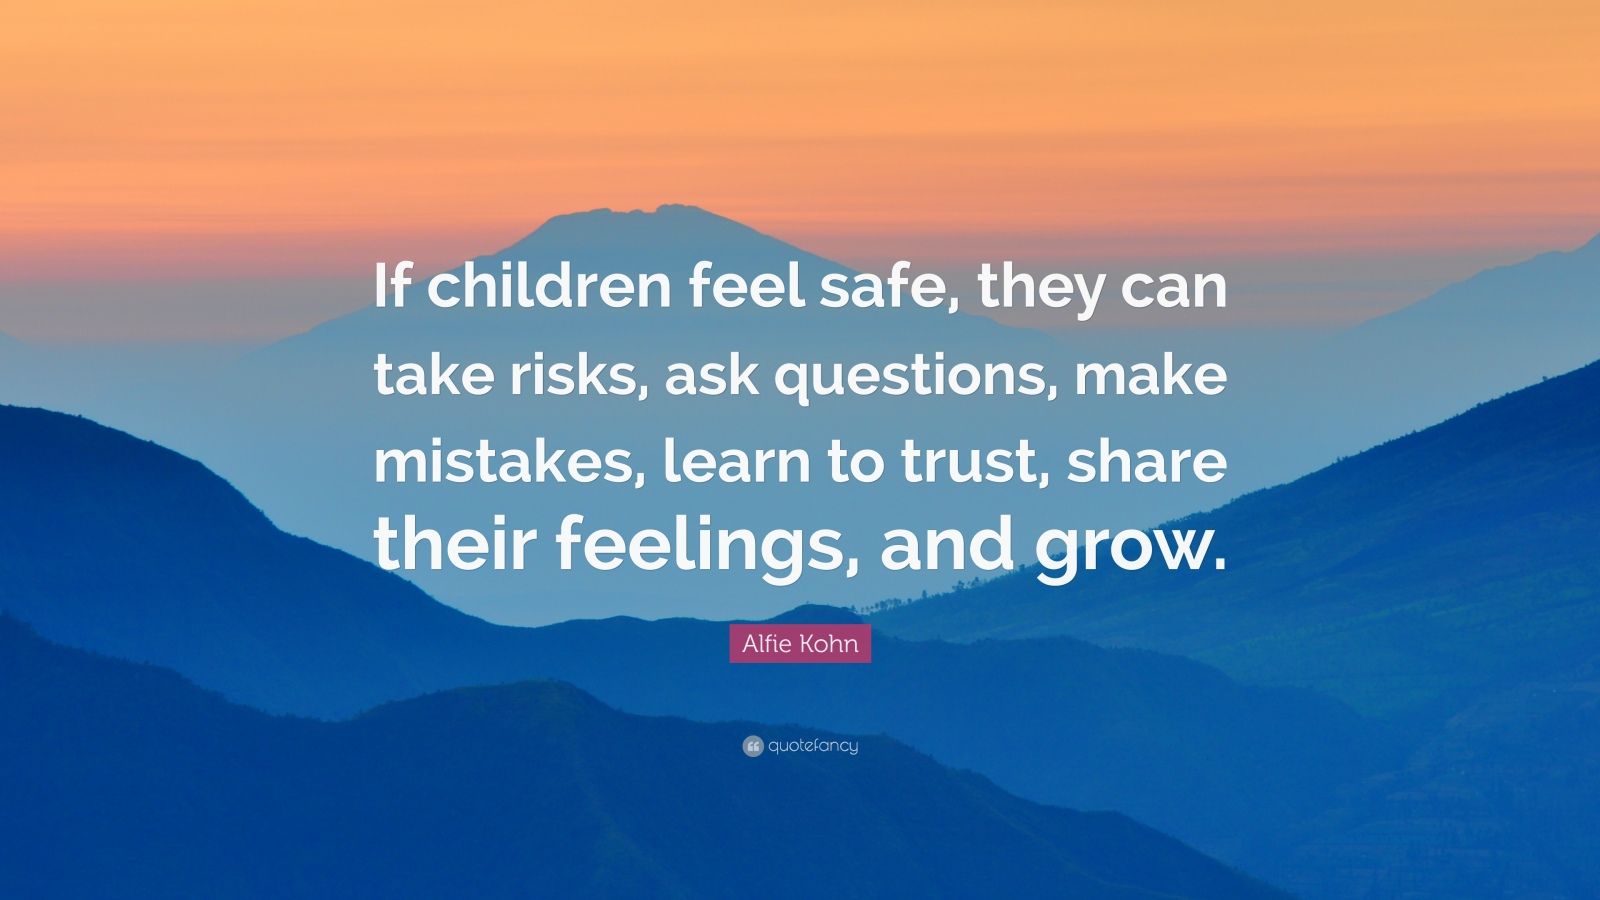 Alfie Kohn Quote: “If children feel safe, they can take risks, ask